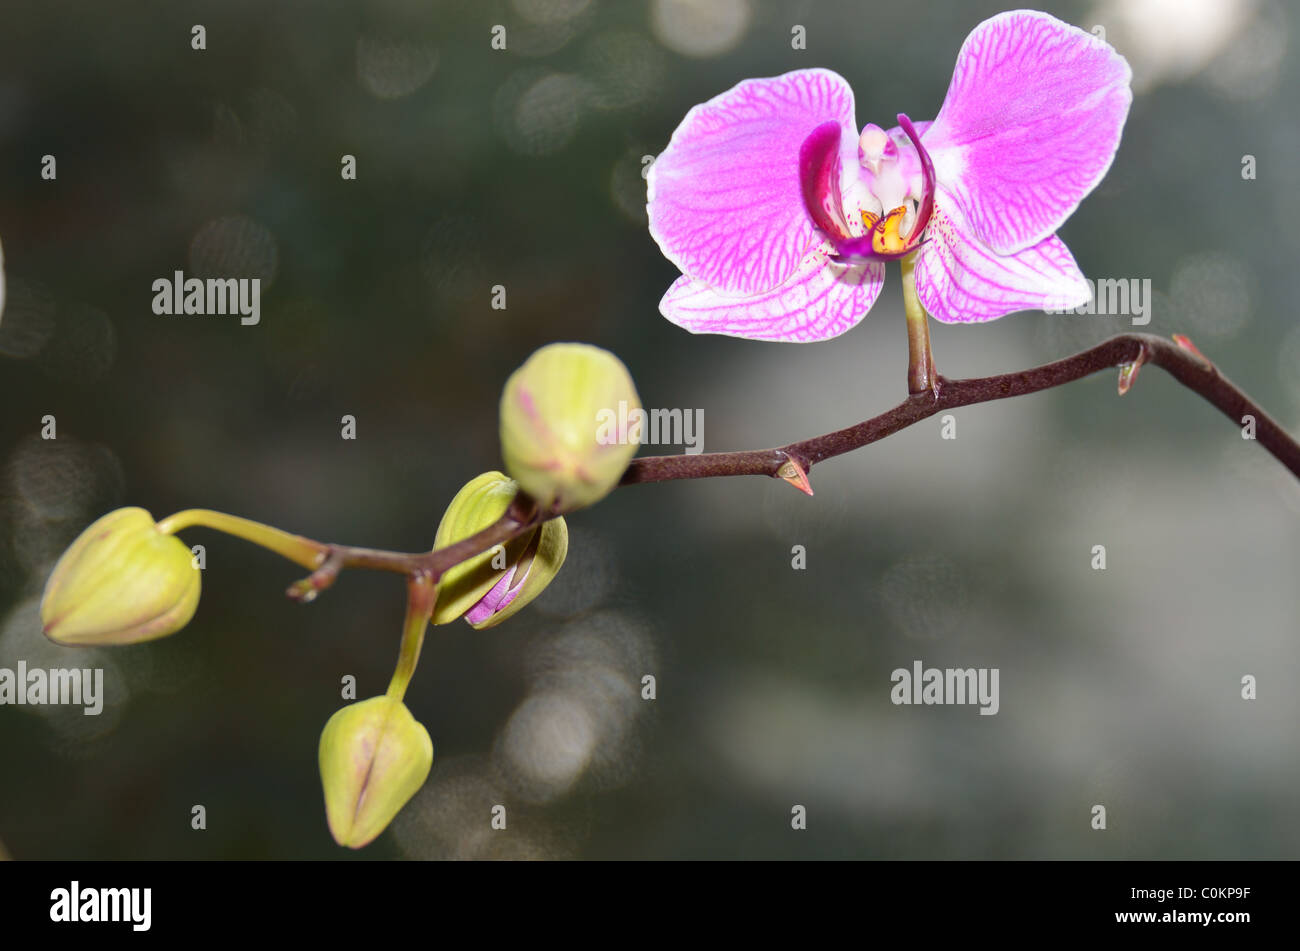 Orchid flower and buds Stock Photo